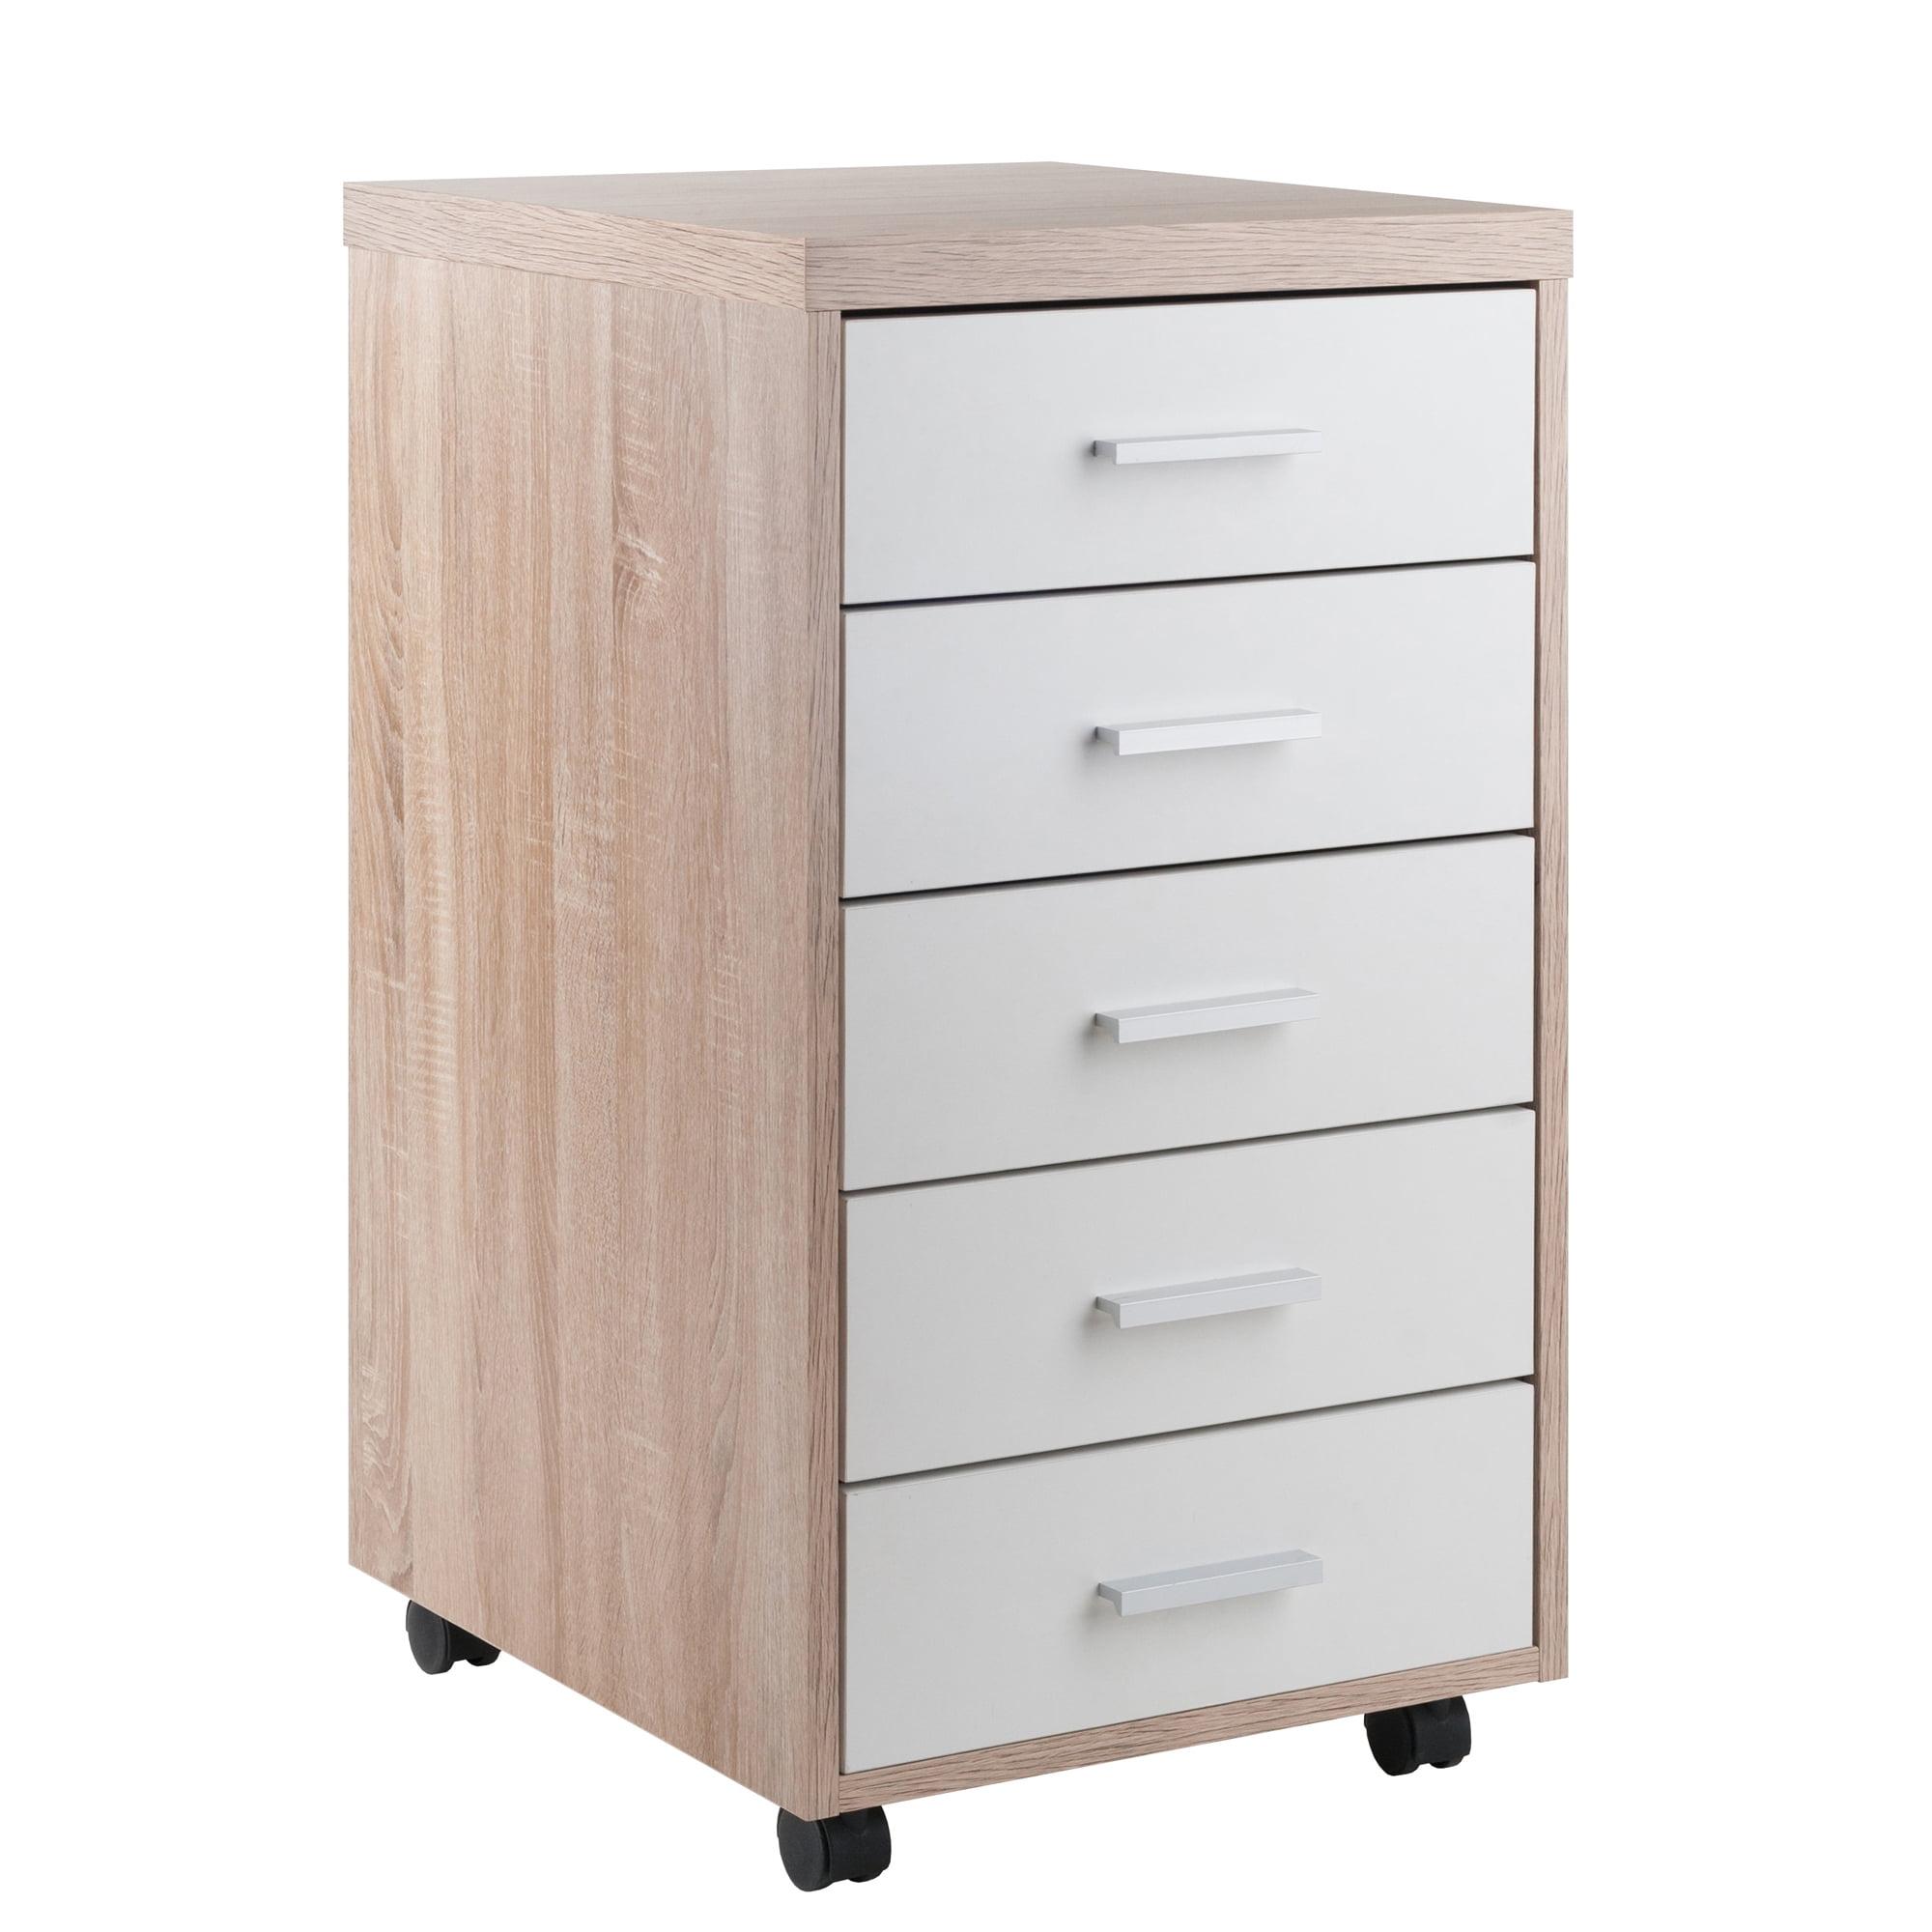 Transitional Kenner 5-Drawer Mobile Cabinet in Two-Tone White and Brown